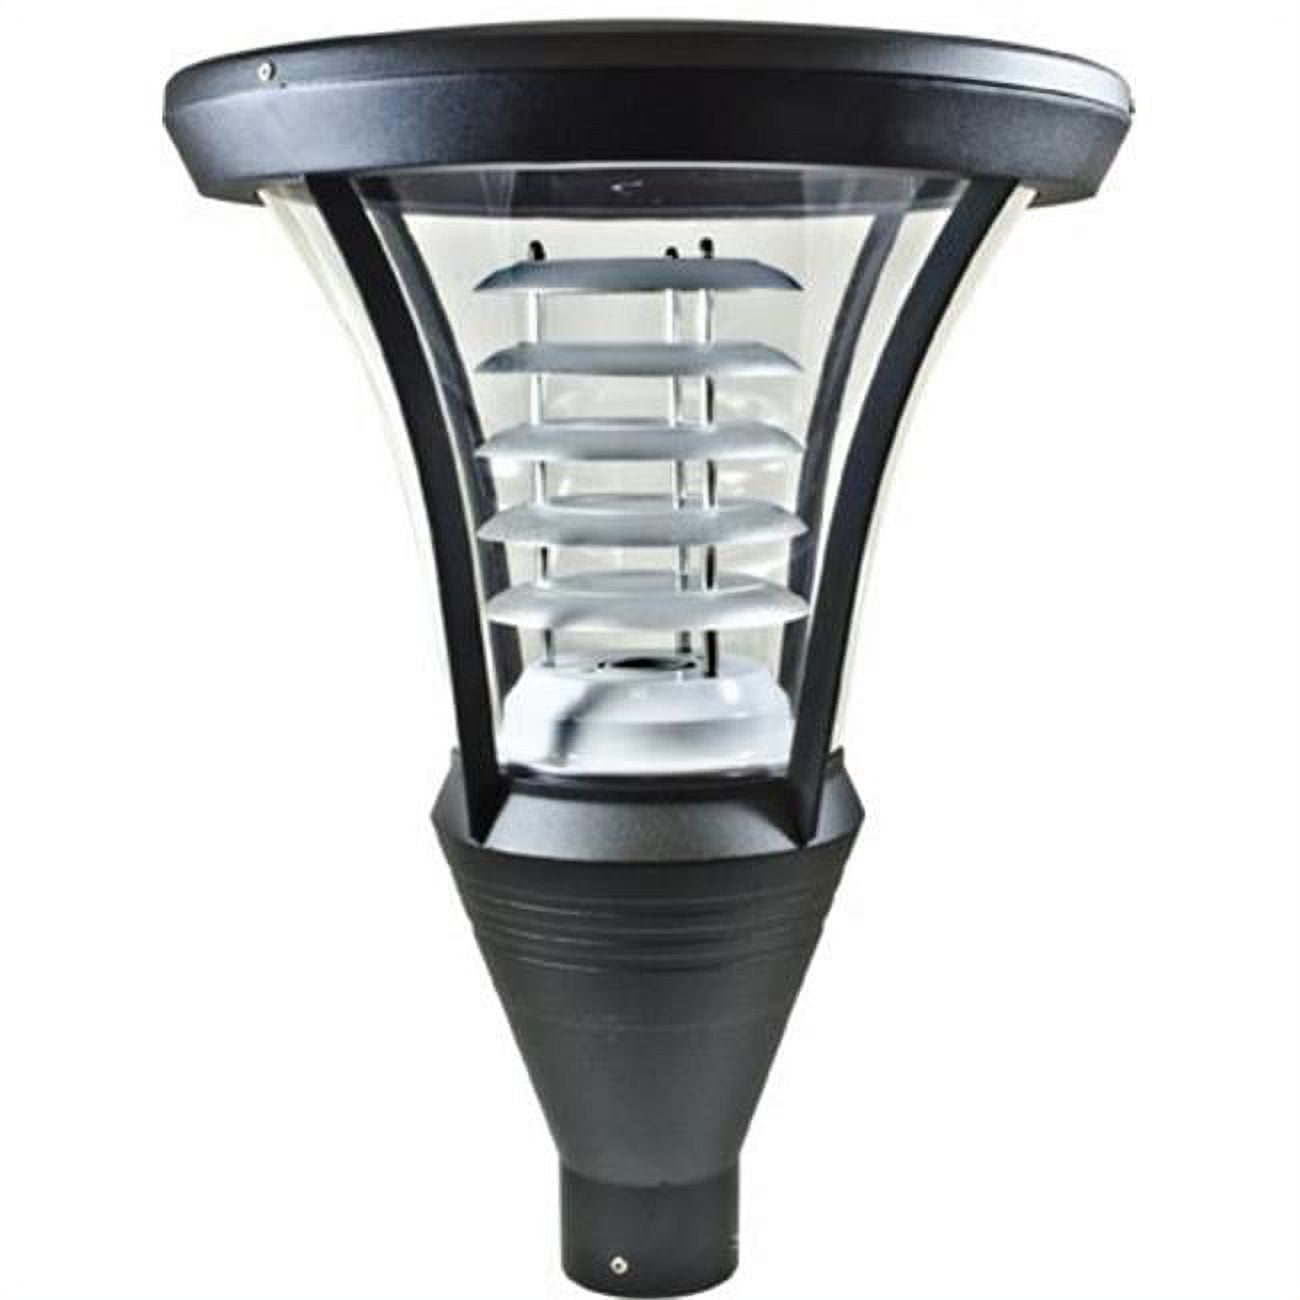 Picture of Dabmar Lighting GM646-B 70W 120V Powder Coated Cast Aluminum Post Top Light Fixture with Metal Halide Lamp, Black - 22.75 x 17.25 x 17.25 in.